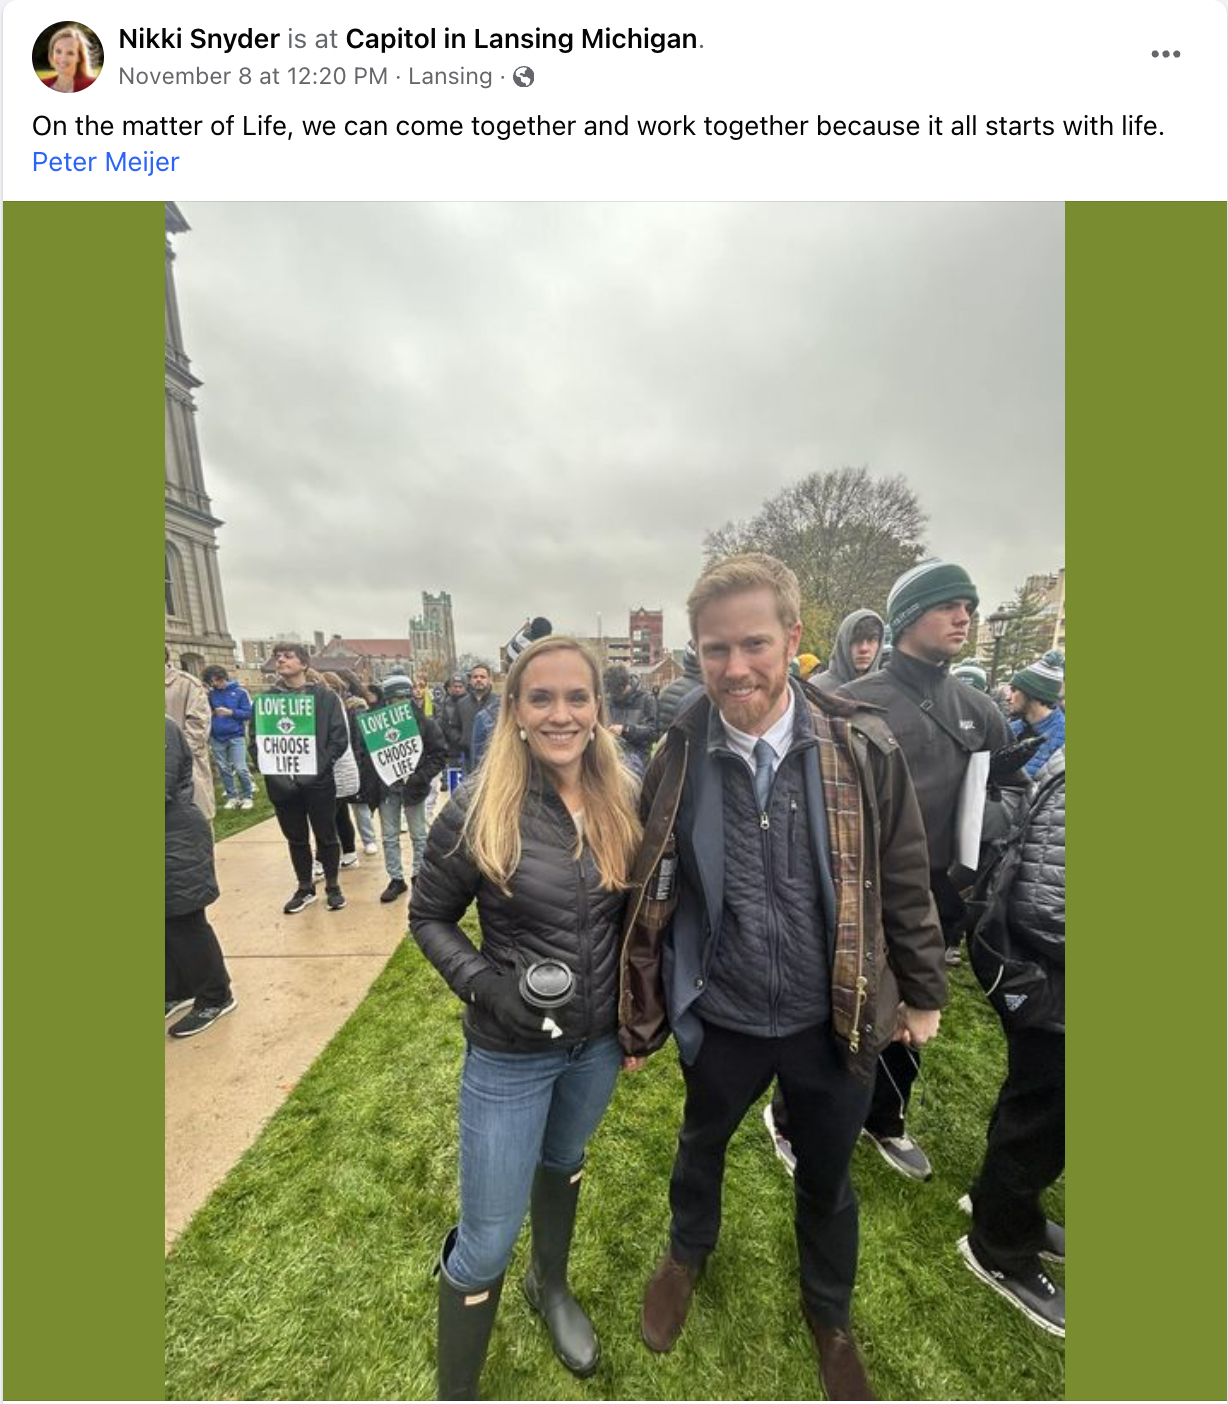 Nikki Snyder Facebook post with a photo of Snyder and Meijer at the Michigan Right to Life March